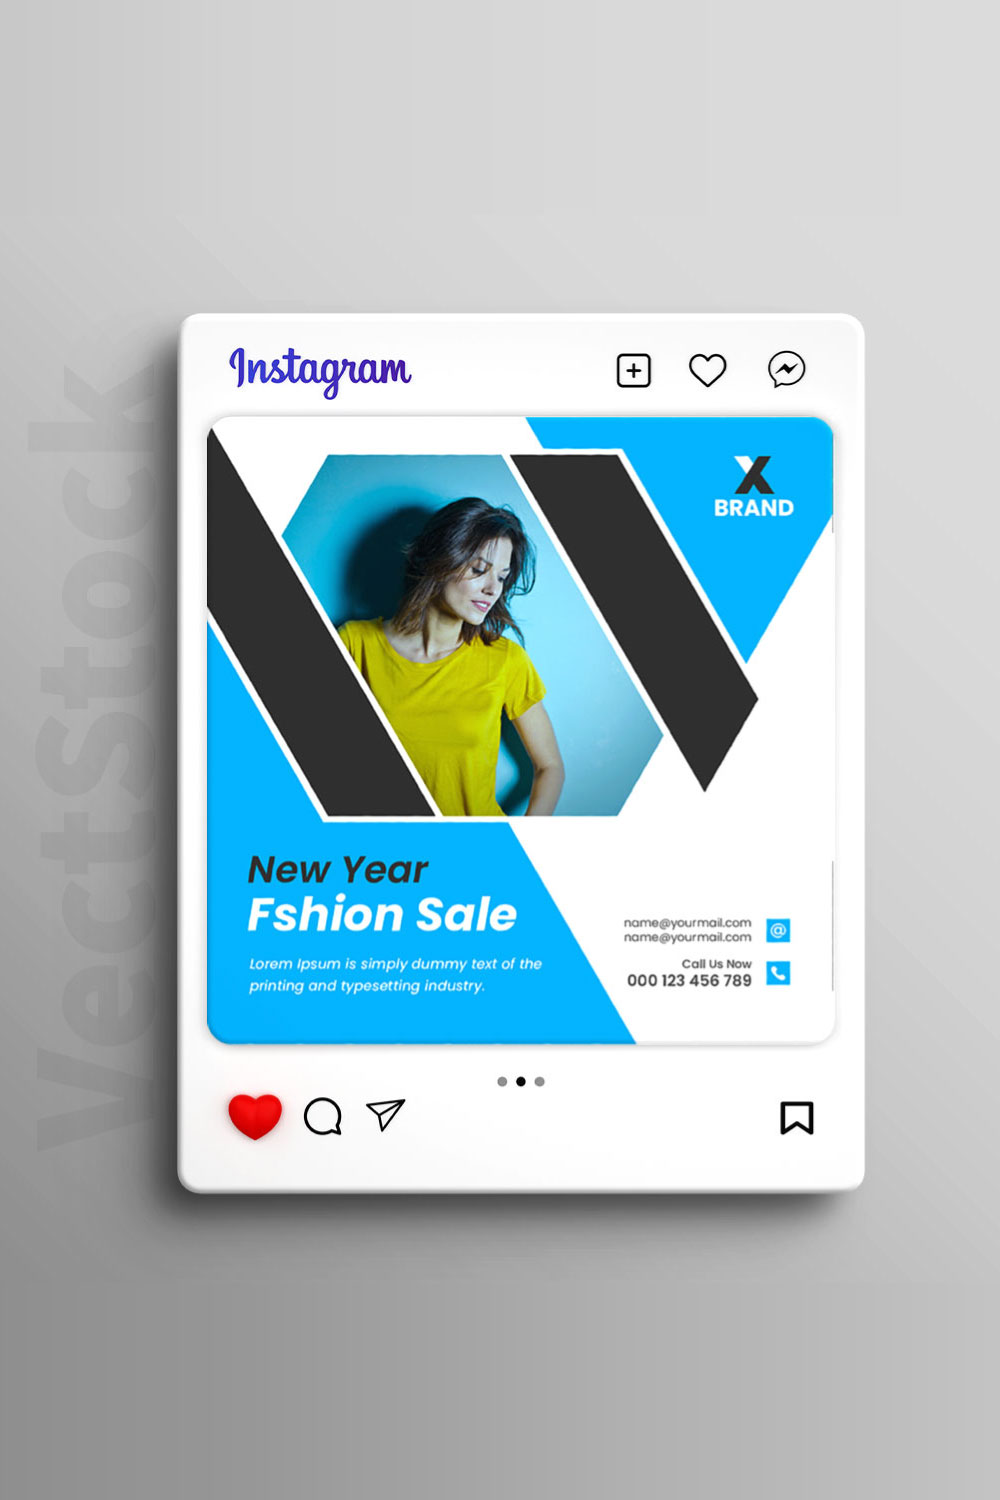 Yew year fashion sale social media Instagram post and banner template design pinterest preview image.